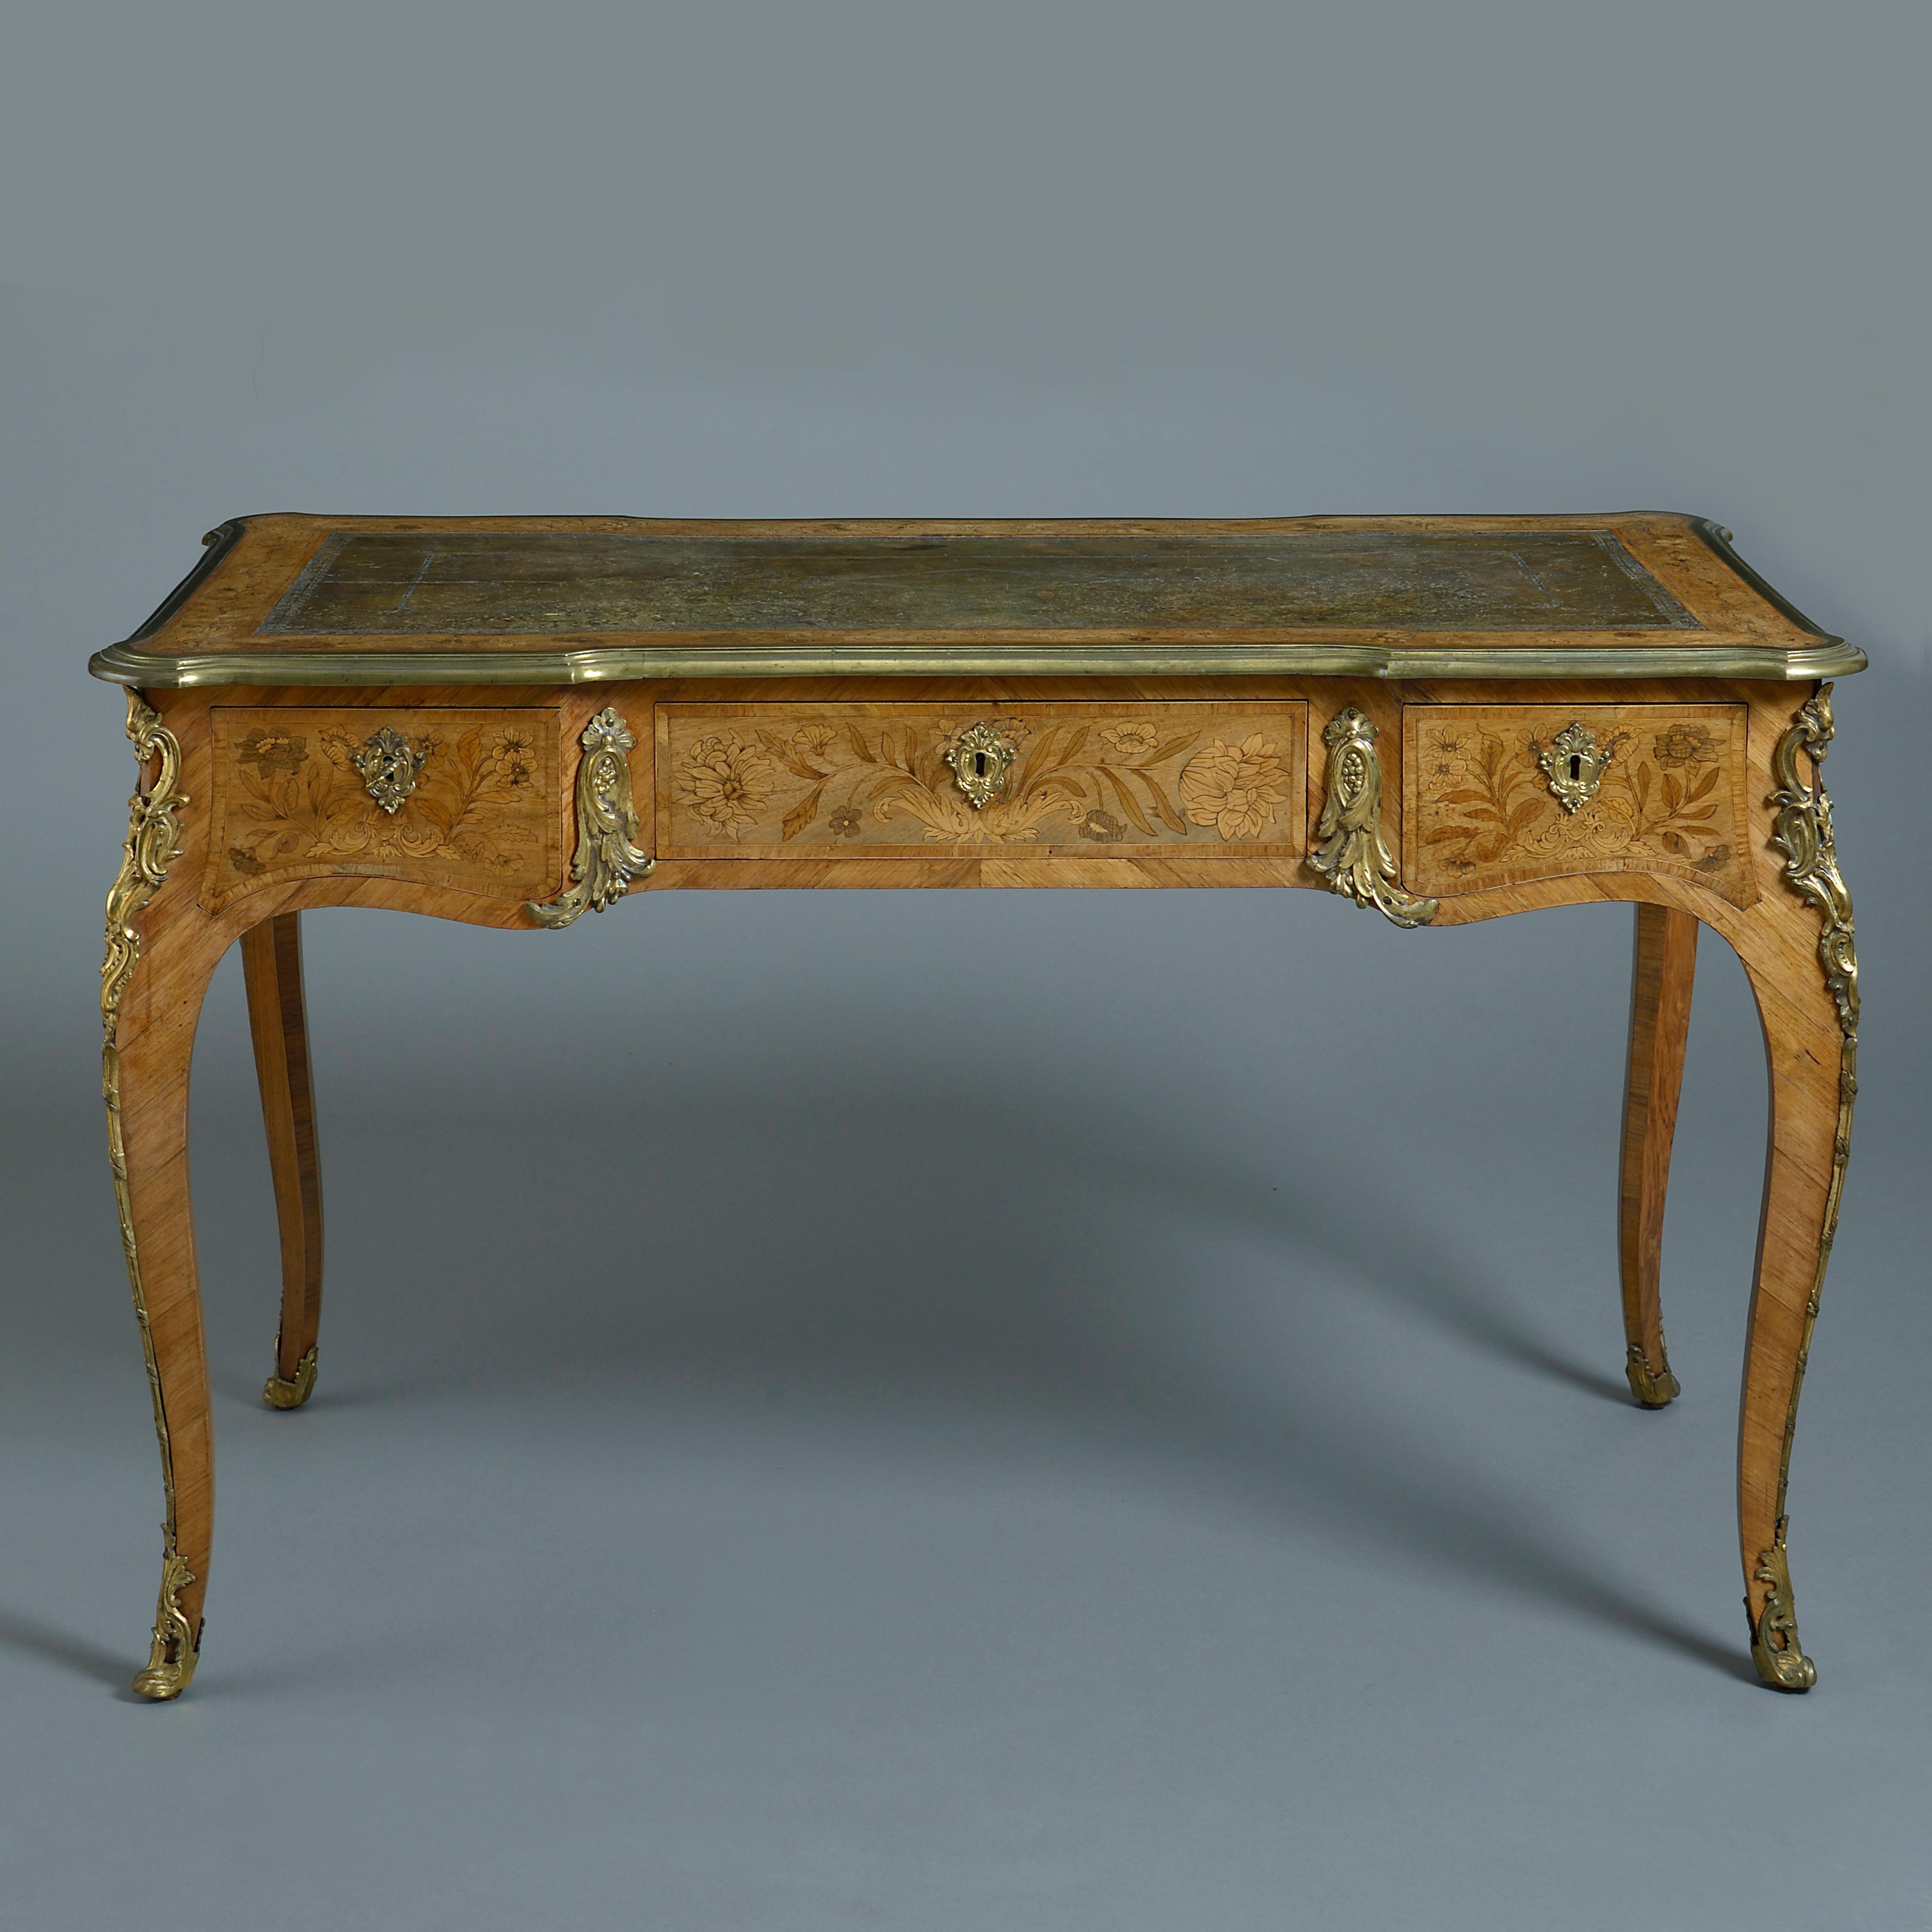 Victorian Ormolu-Mounted Marquetry Bureau Plat In Good Condition For Sale In London, GB